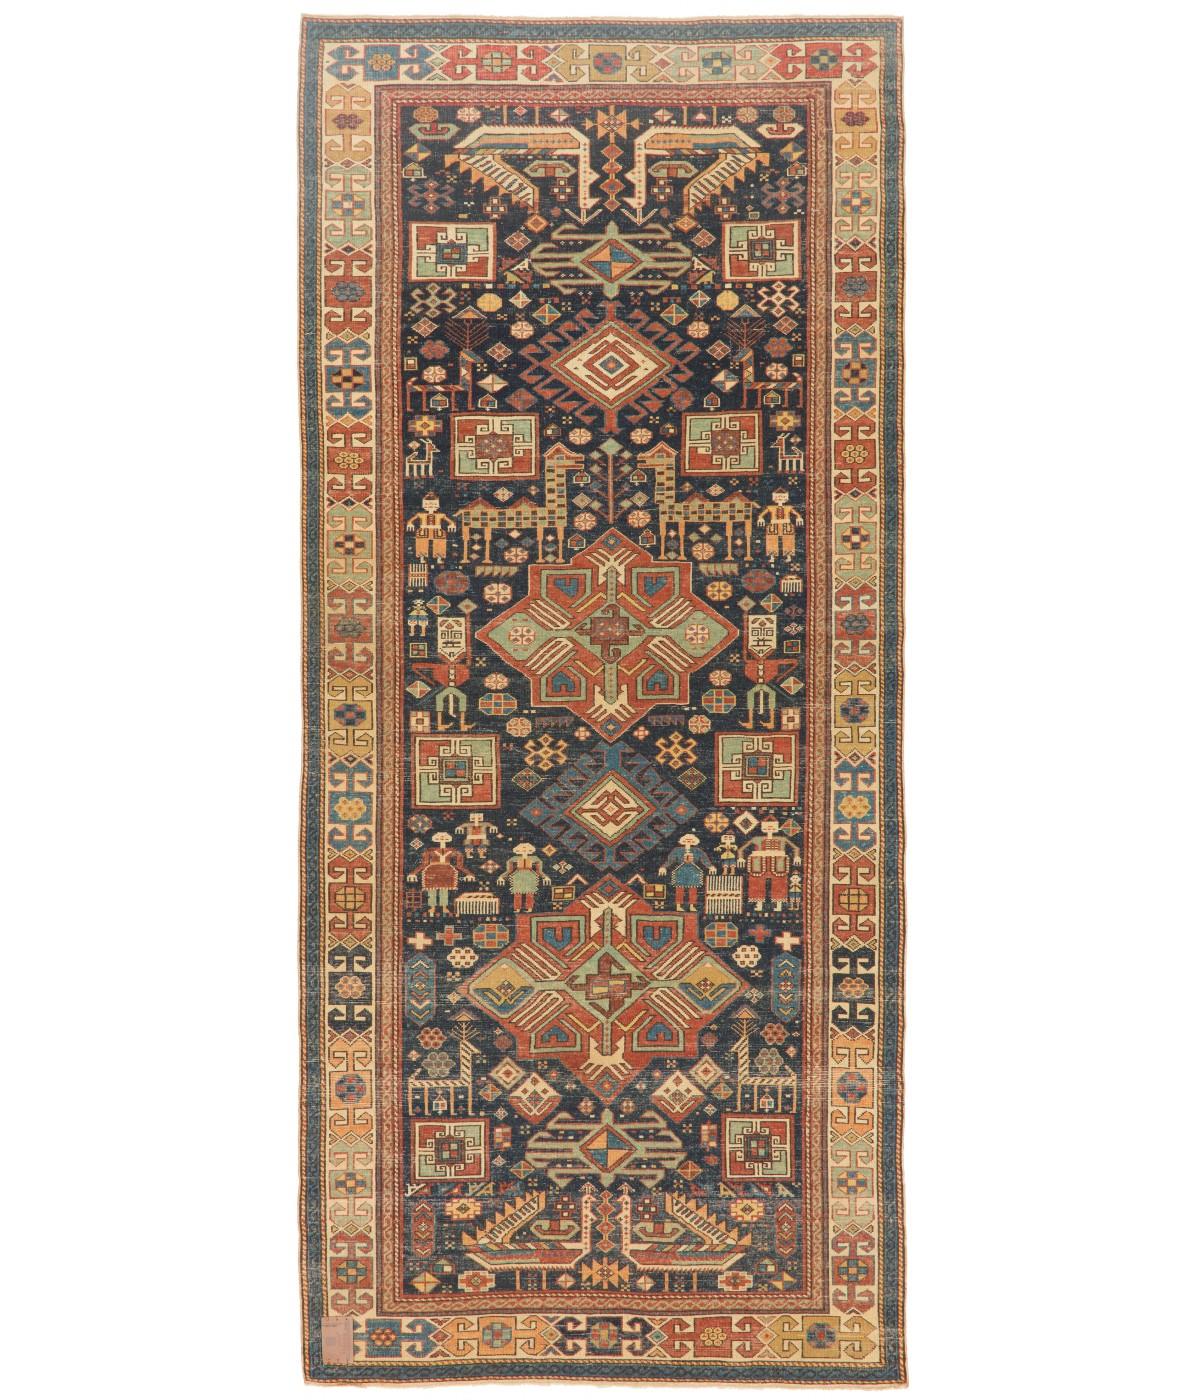 The source of the rug comes from the book Orient Star – A Carpet Collection, E. Heinrich Kirchheim, Hali Publications Ltd, 1993 nr.7. This rug is from the late 19th century, Kazak region, Caucasus area. The Akstafa design reminds the basic